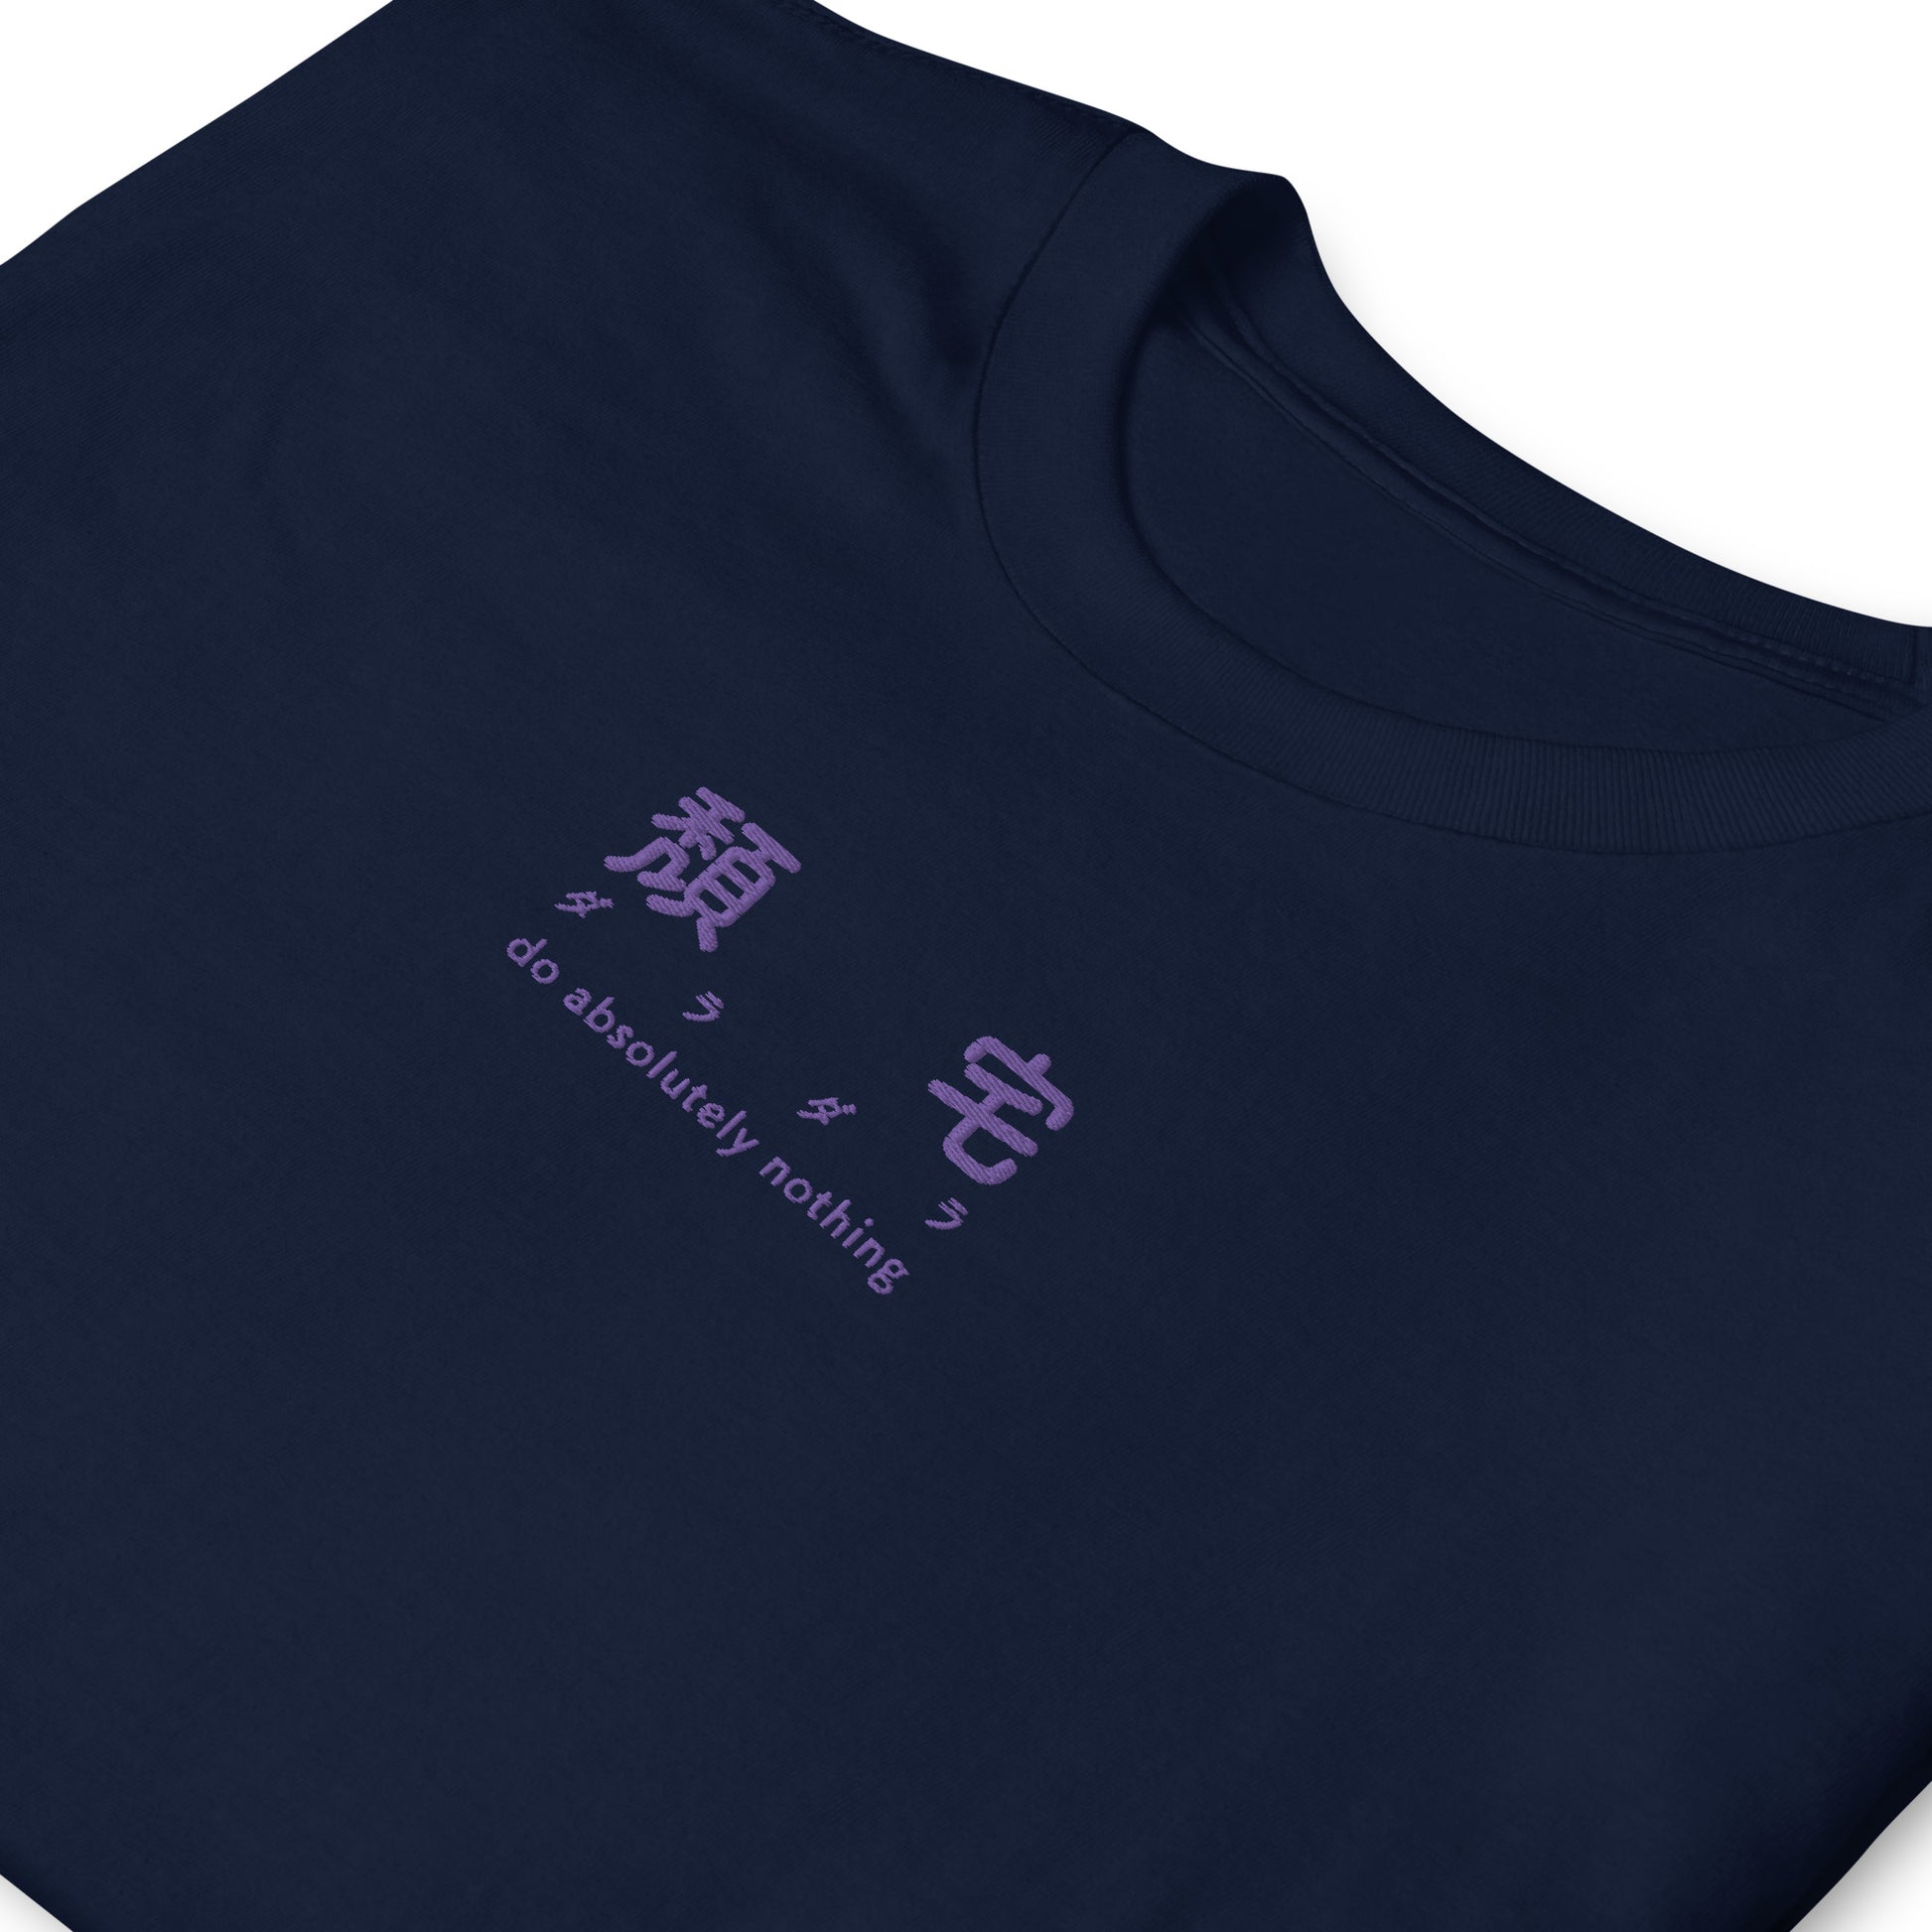 Navy High Quality Tee - Front Design with an Purple Embroidery "do absolutely nothing" in three languages